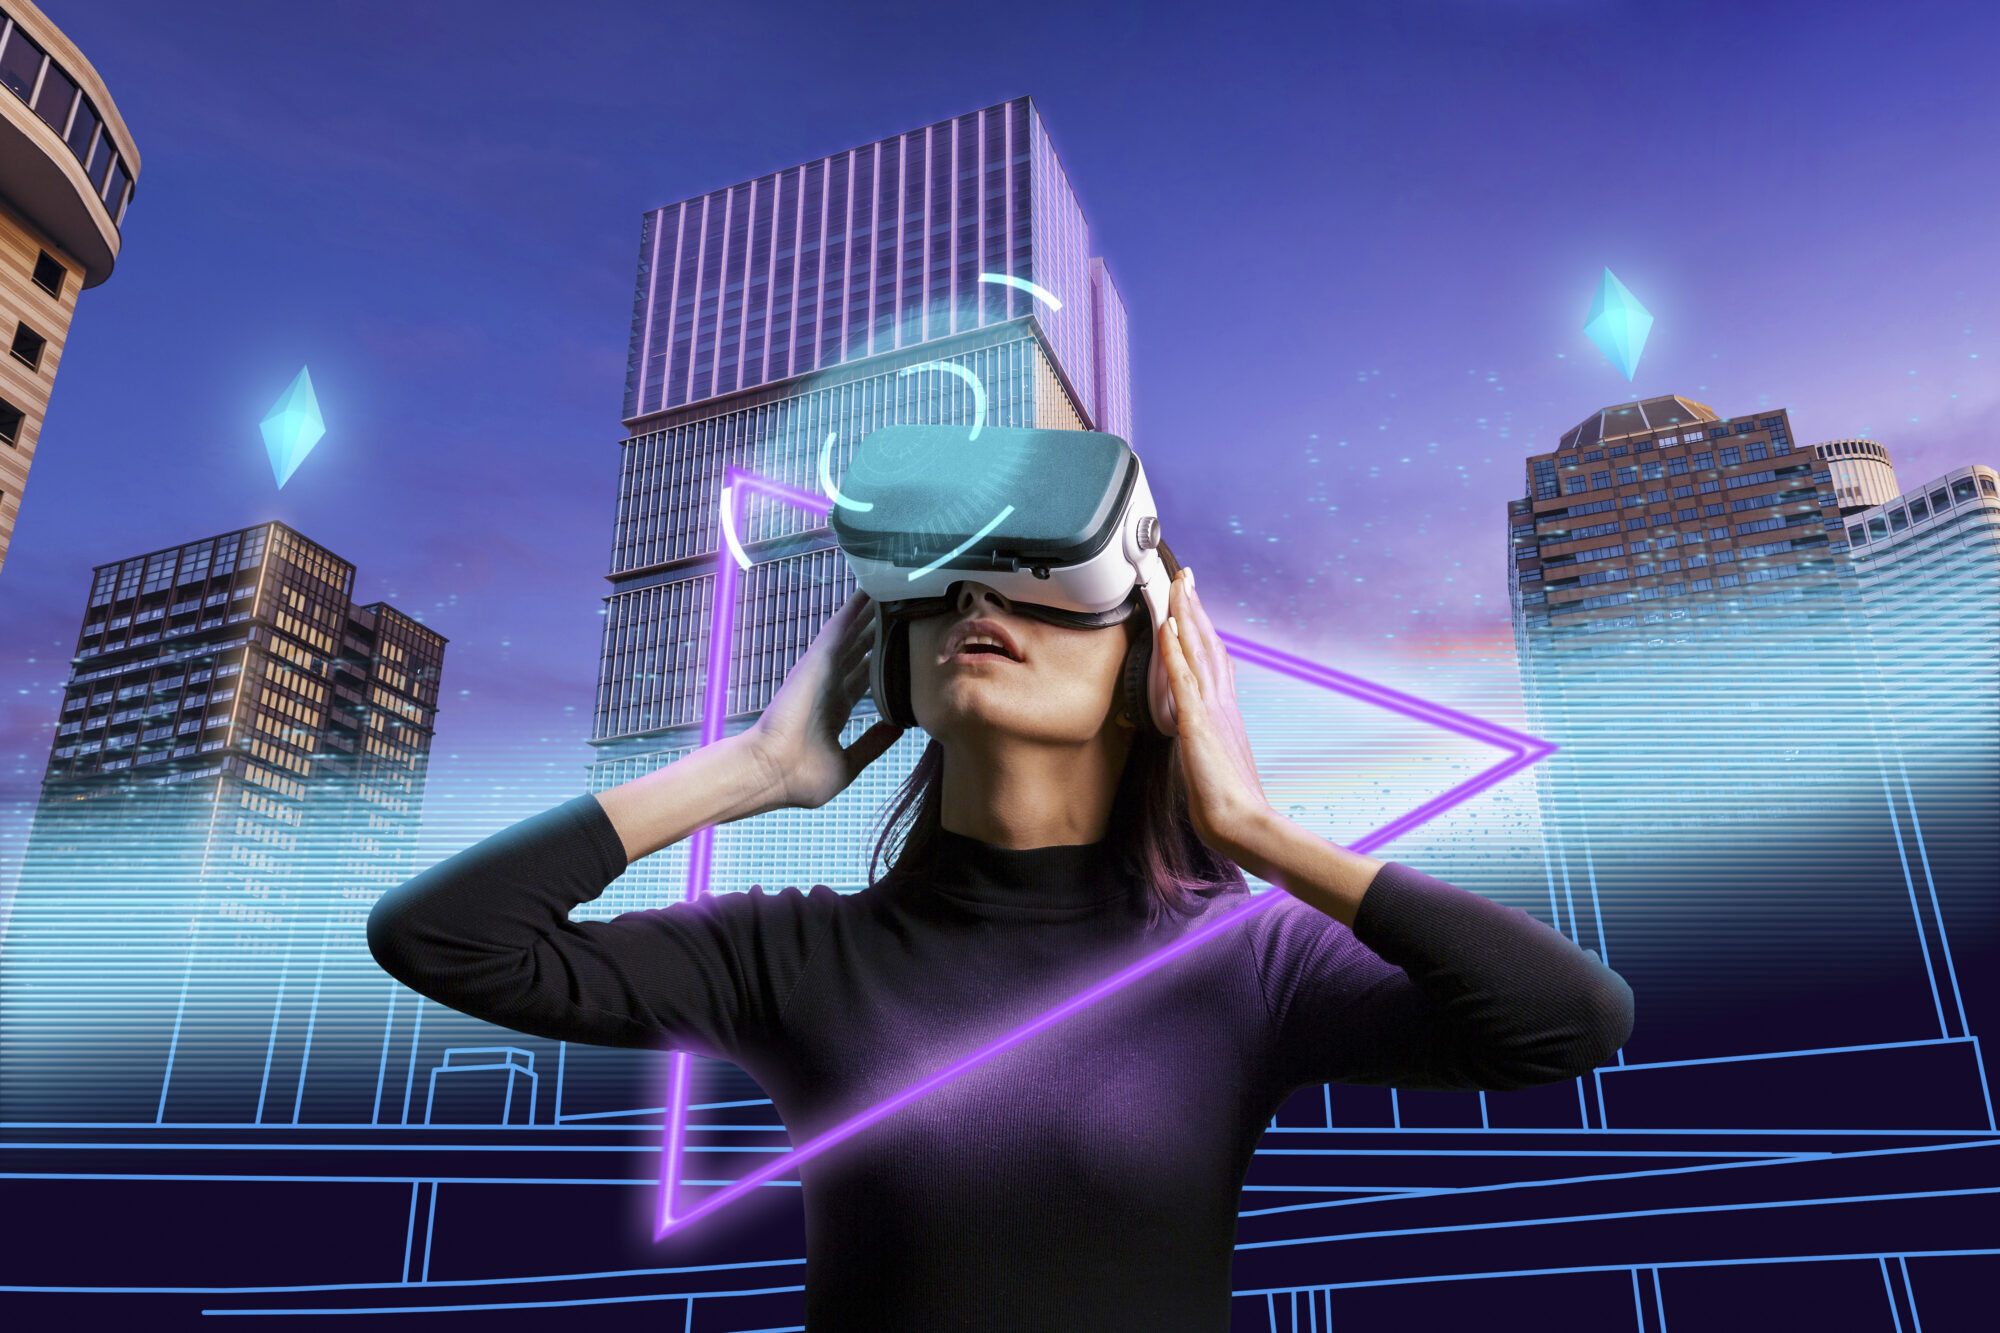 immersive technologies - metaverse and augmented reality